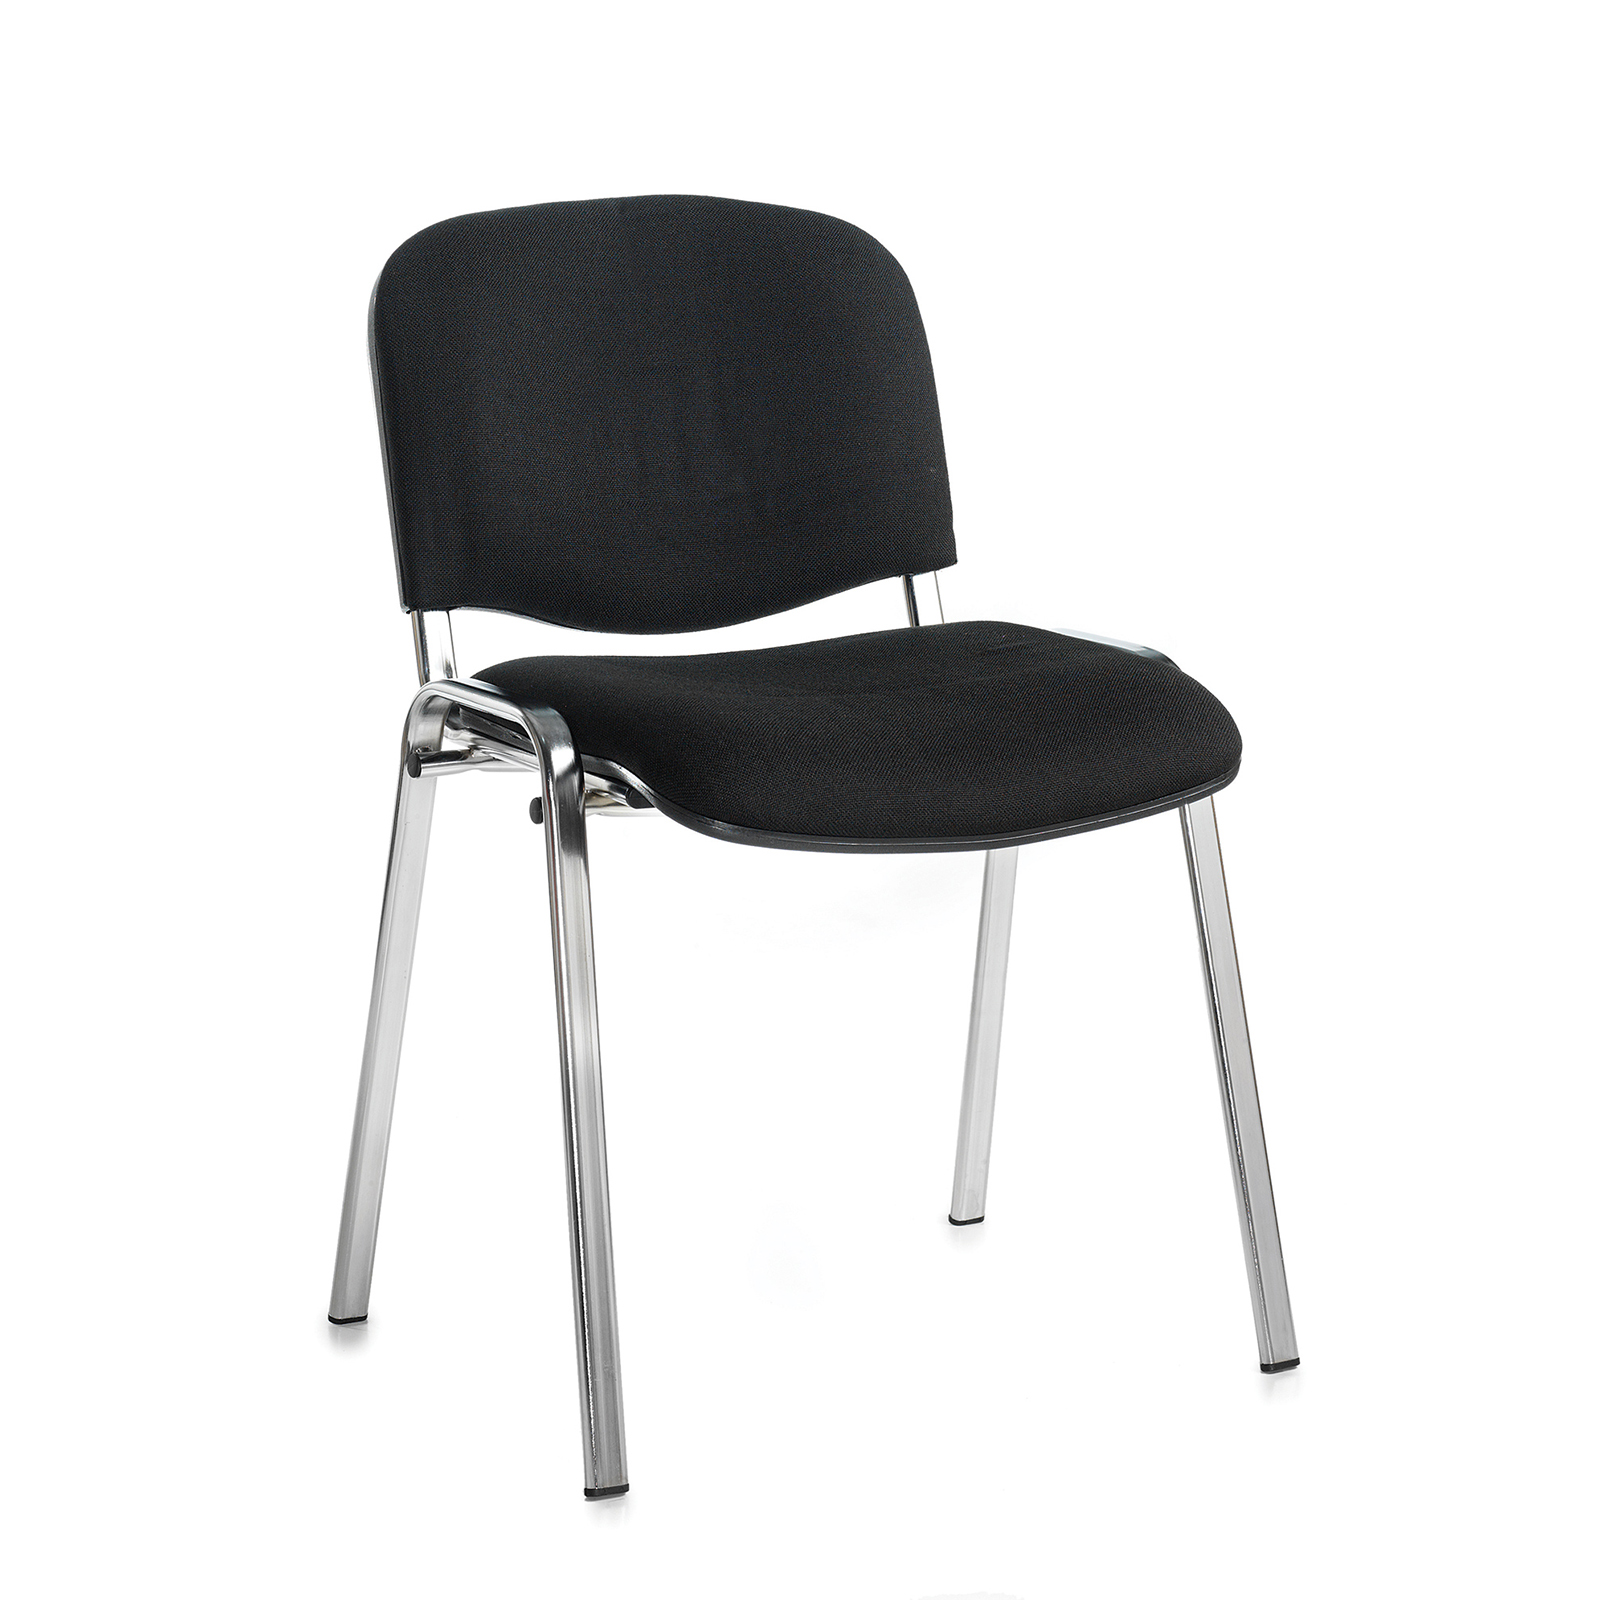 Boardroom / Meeting Taurus meeting room stackable chair with chrome frame and no arms - black